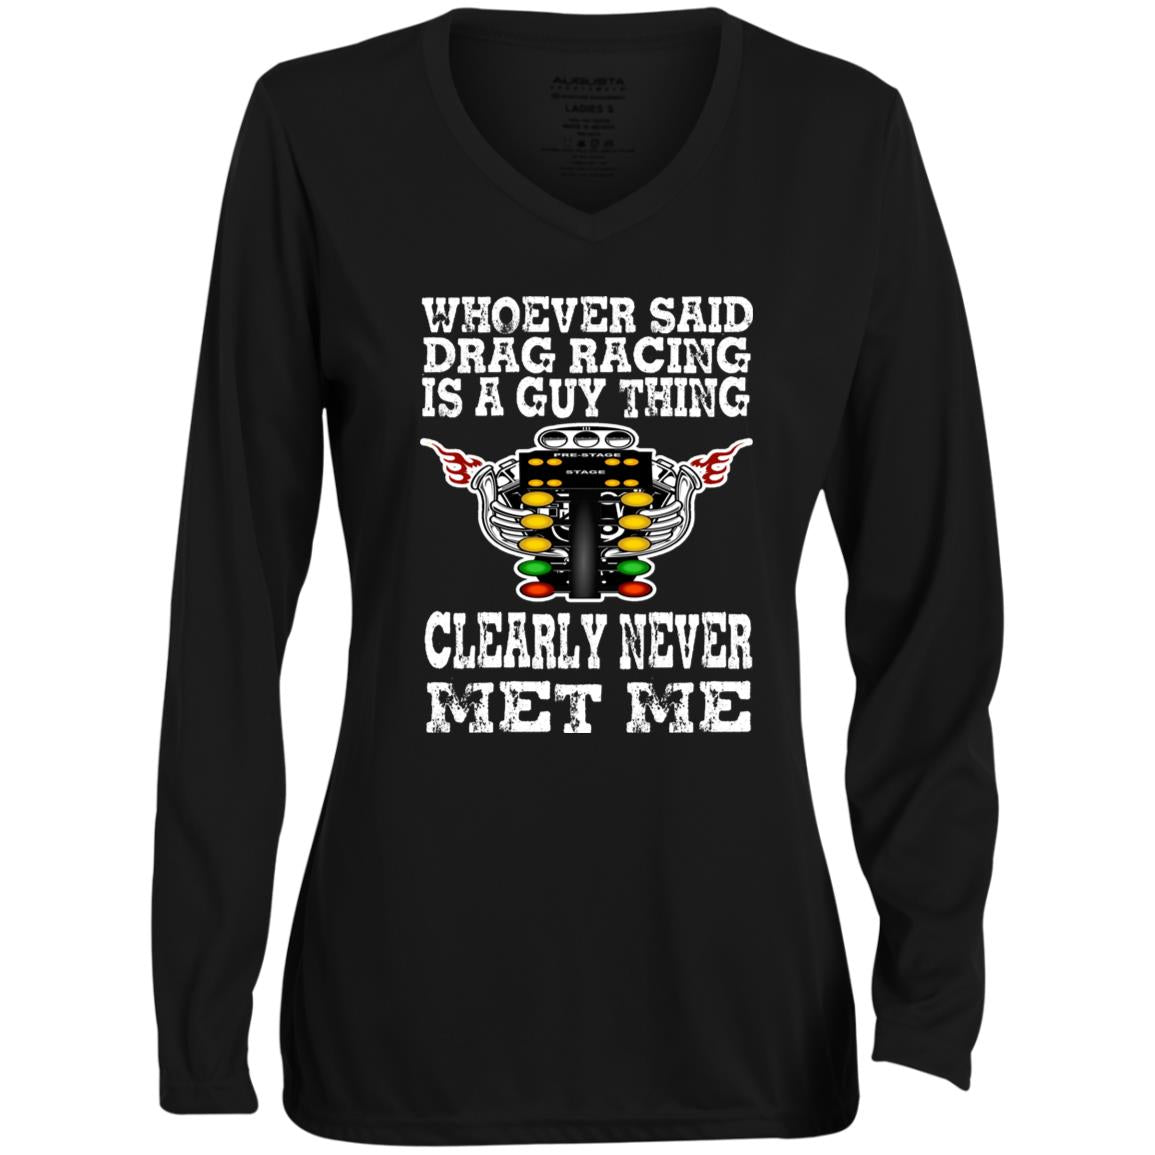 Whoever Said Drag Racing Is A Guy Thing Ladies' Moisture-Wicking Long Sleeve V-Neck Tee